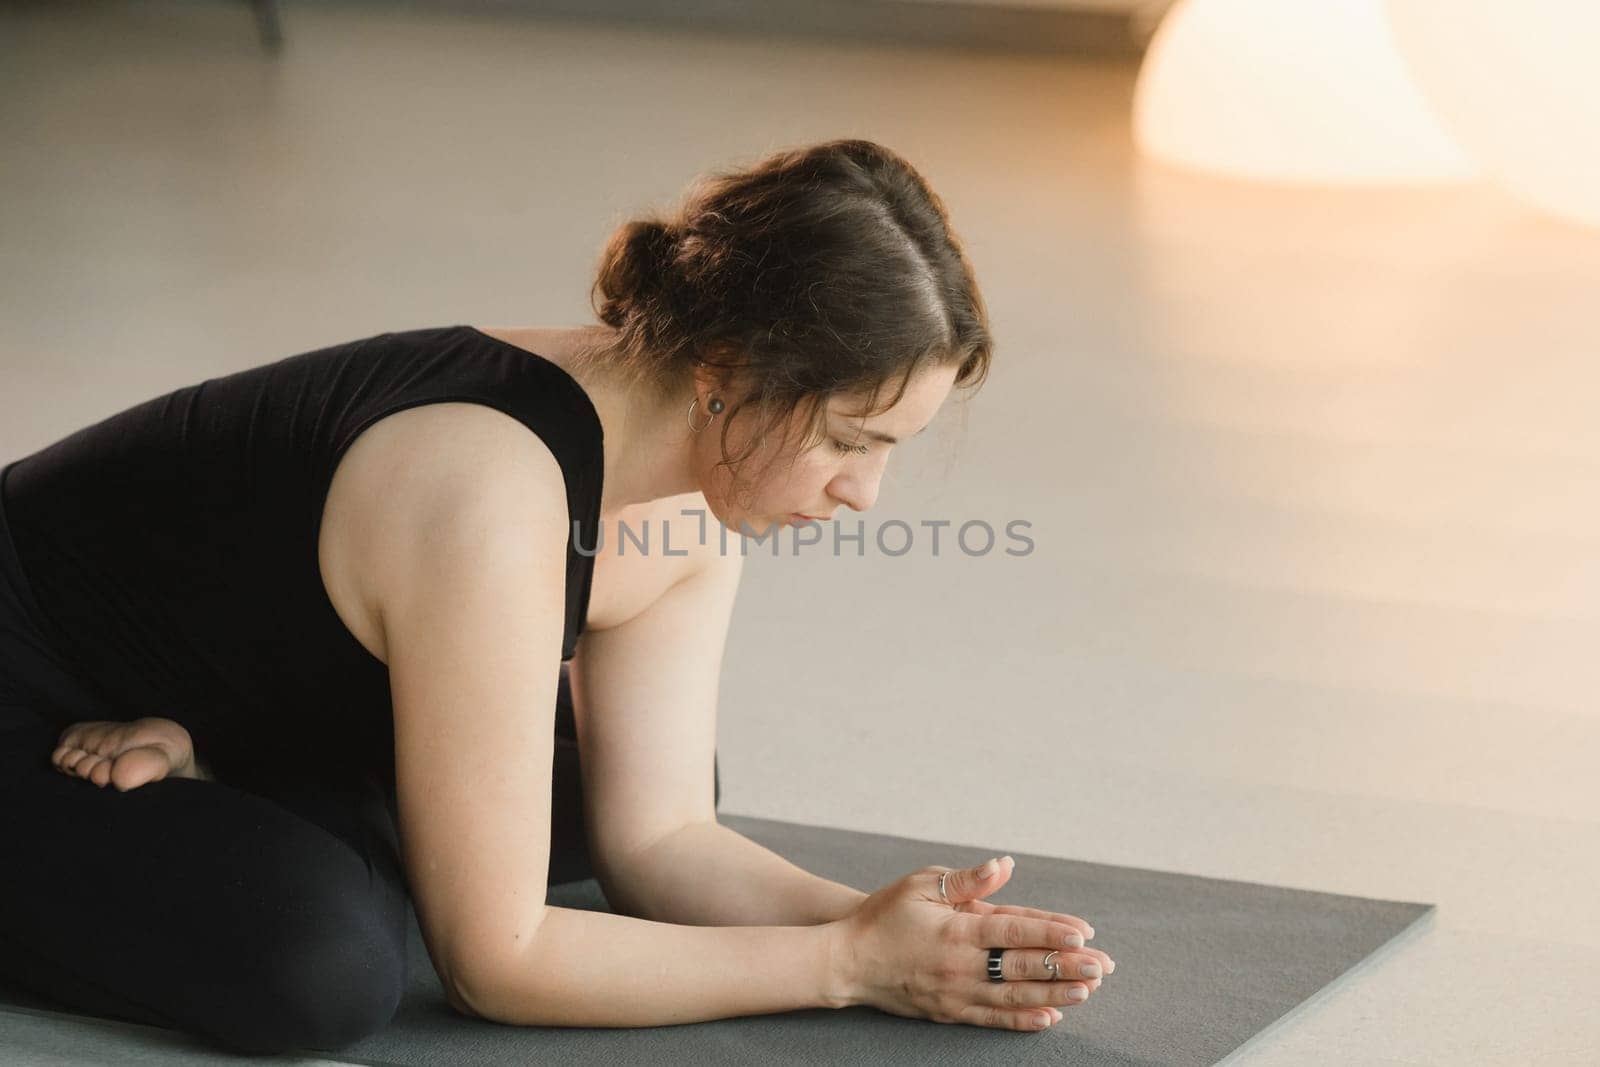 A girl in black sportswear does yoga on a mat in the fitness room.